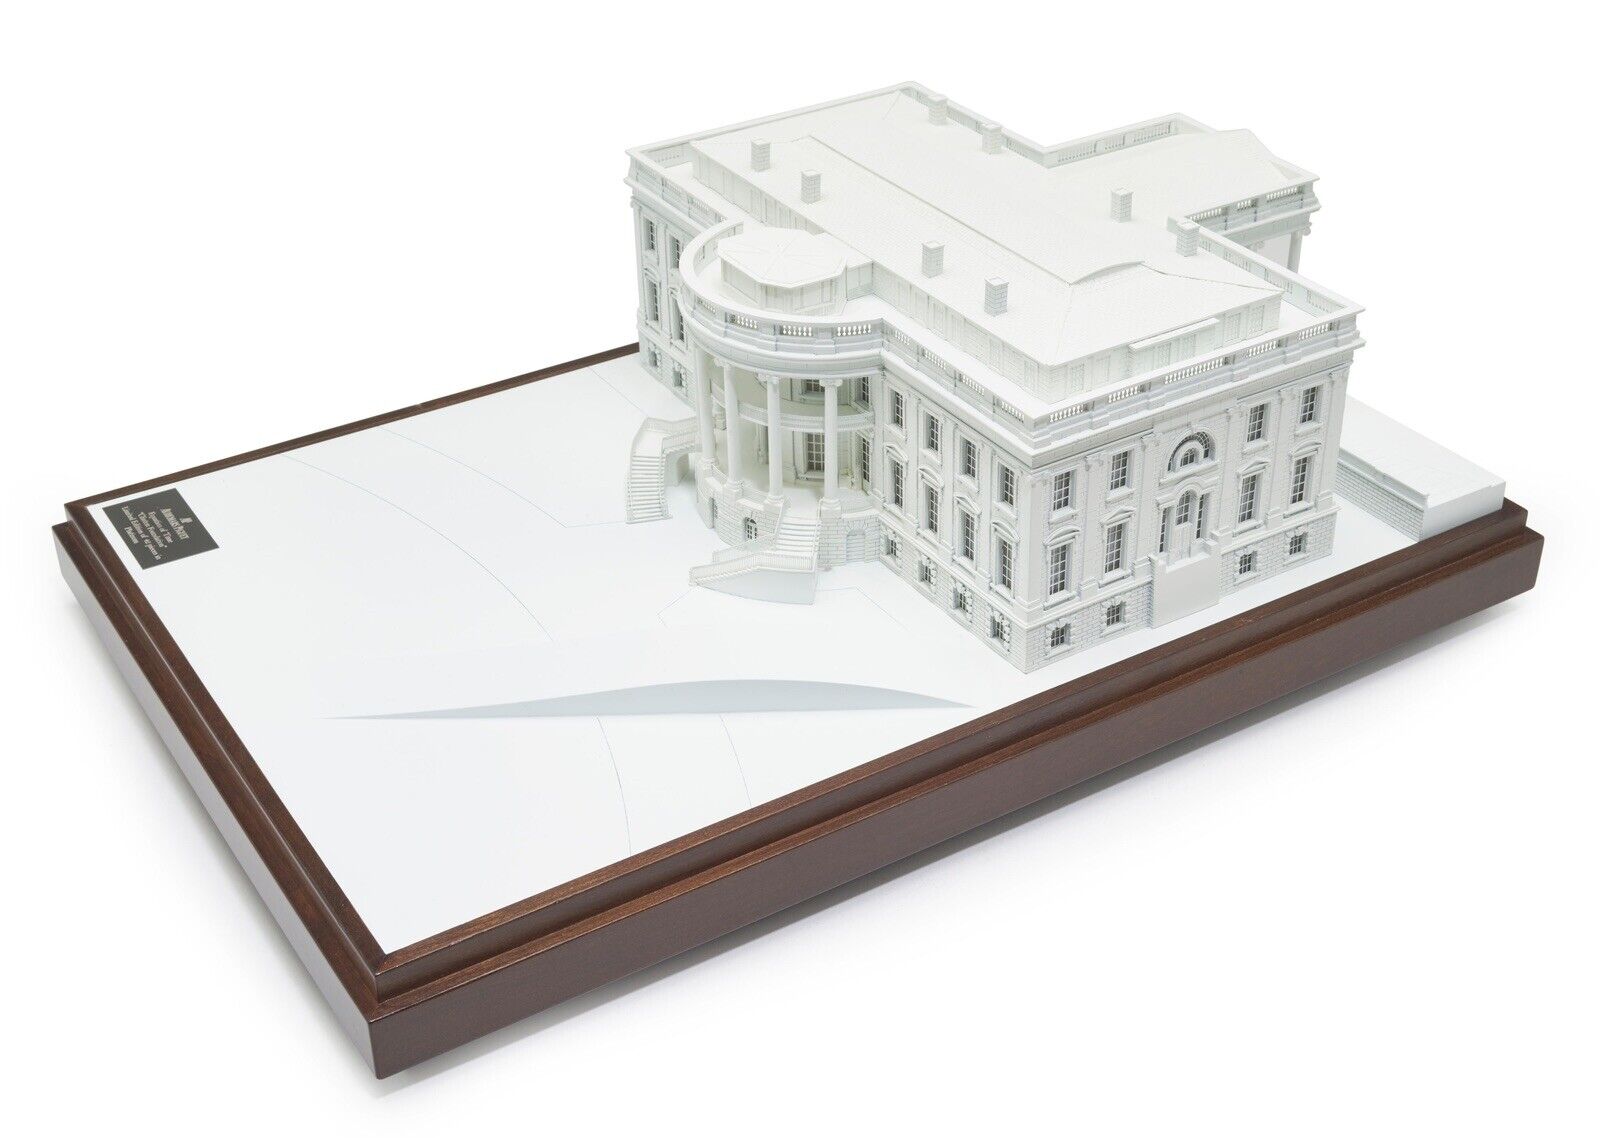 Architectural scale model of the White House, issued by Audemars Piguet